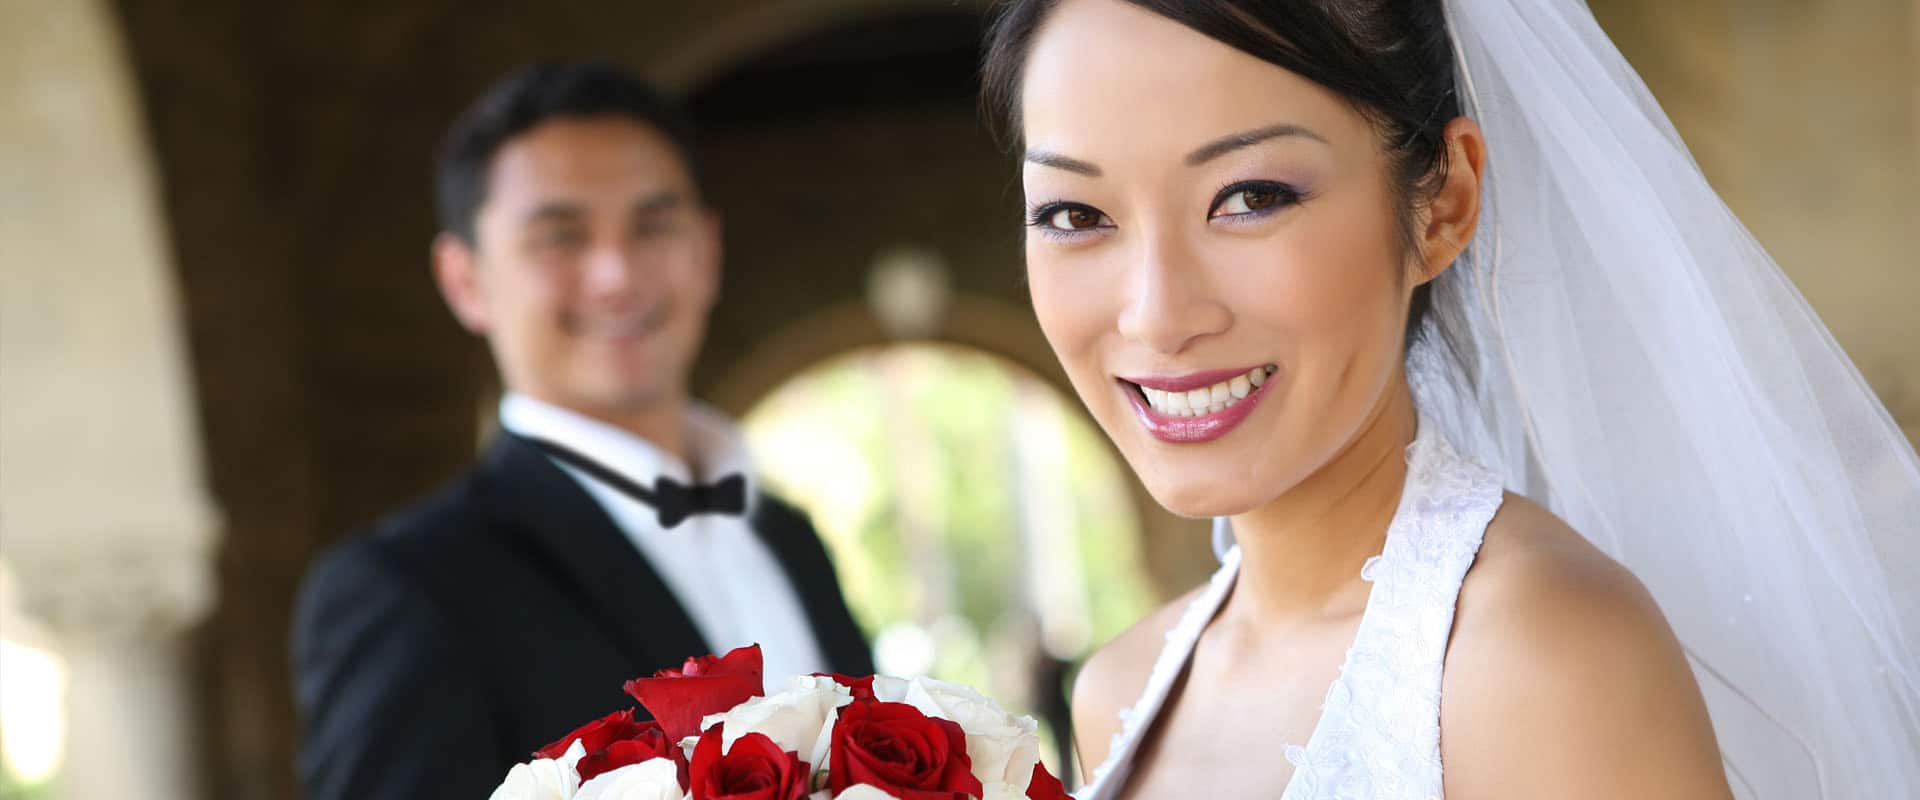 The Best Ways to Whiten Your Teeth Before Your Wedding Day